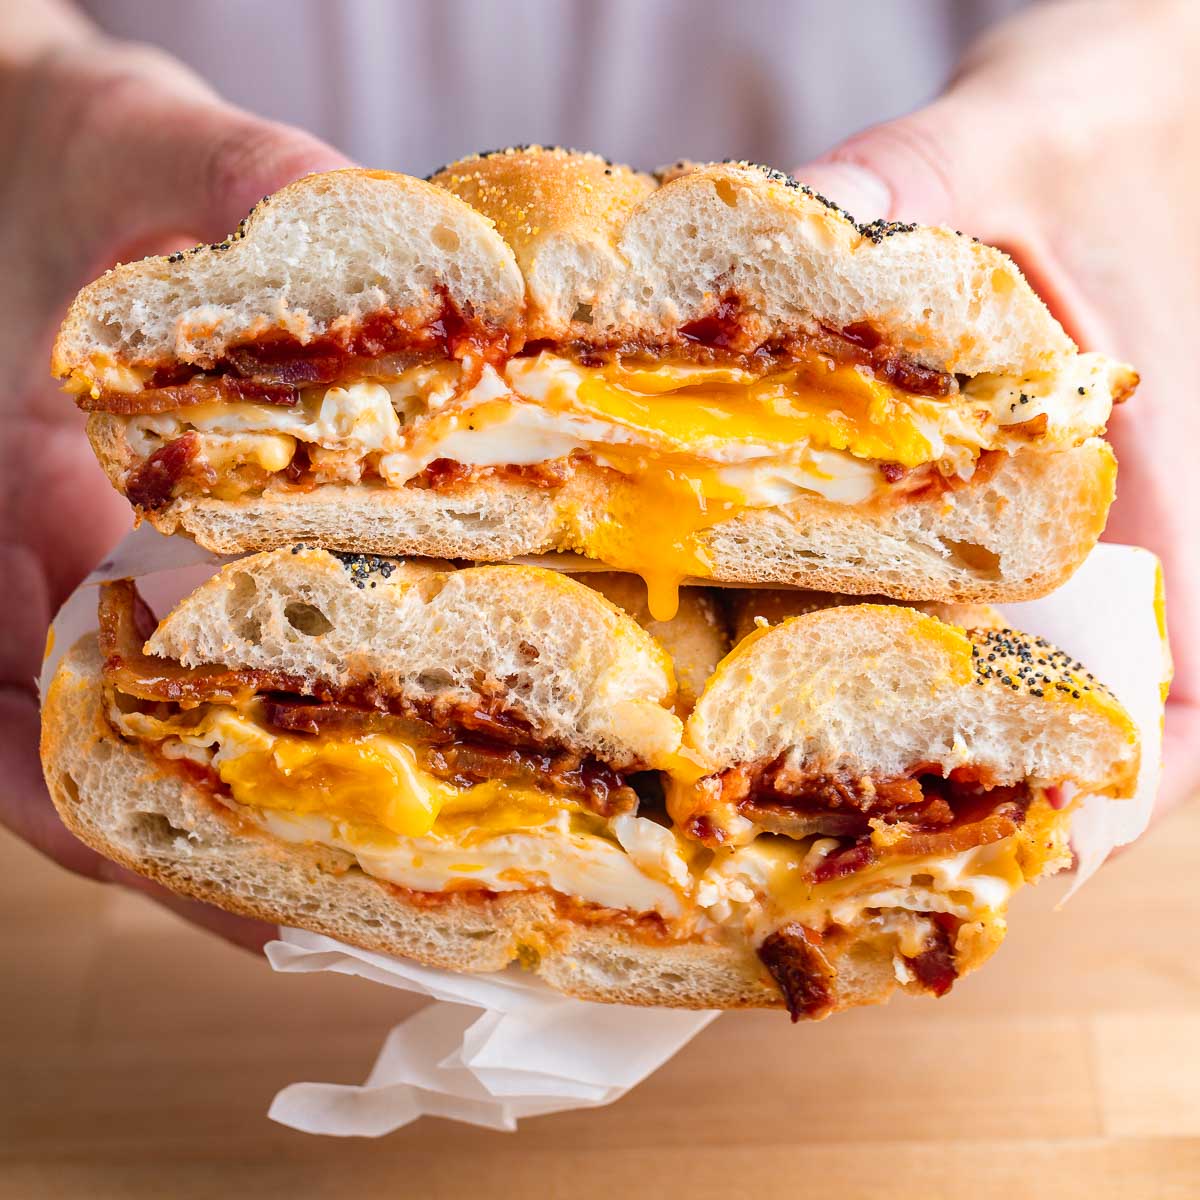 https://www.sipandfeast.com/wp-content/uploads/2021/10/bacon-egg-cheese-recipe-snippet.jpg